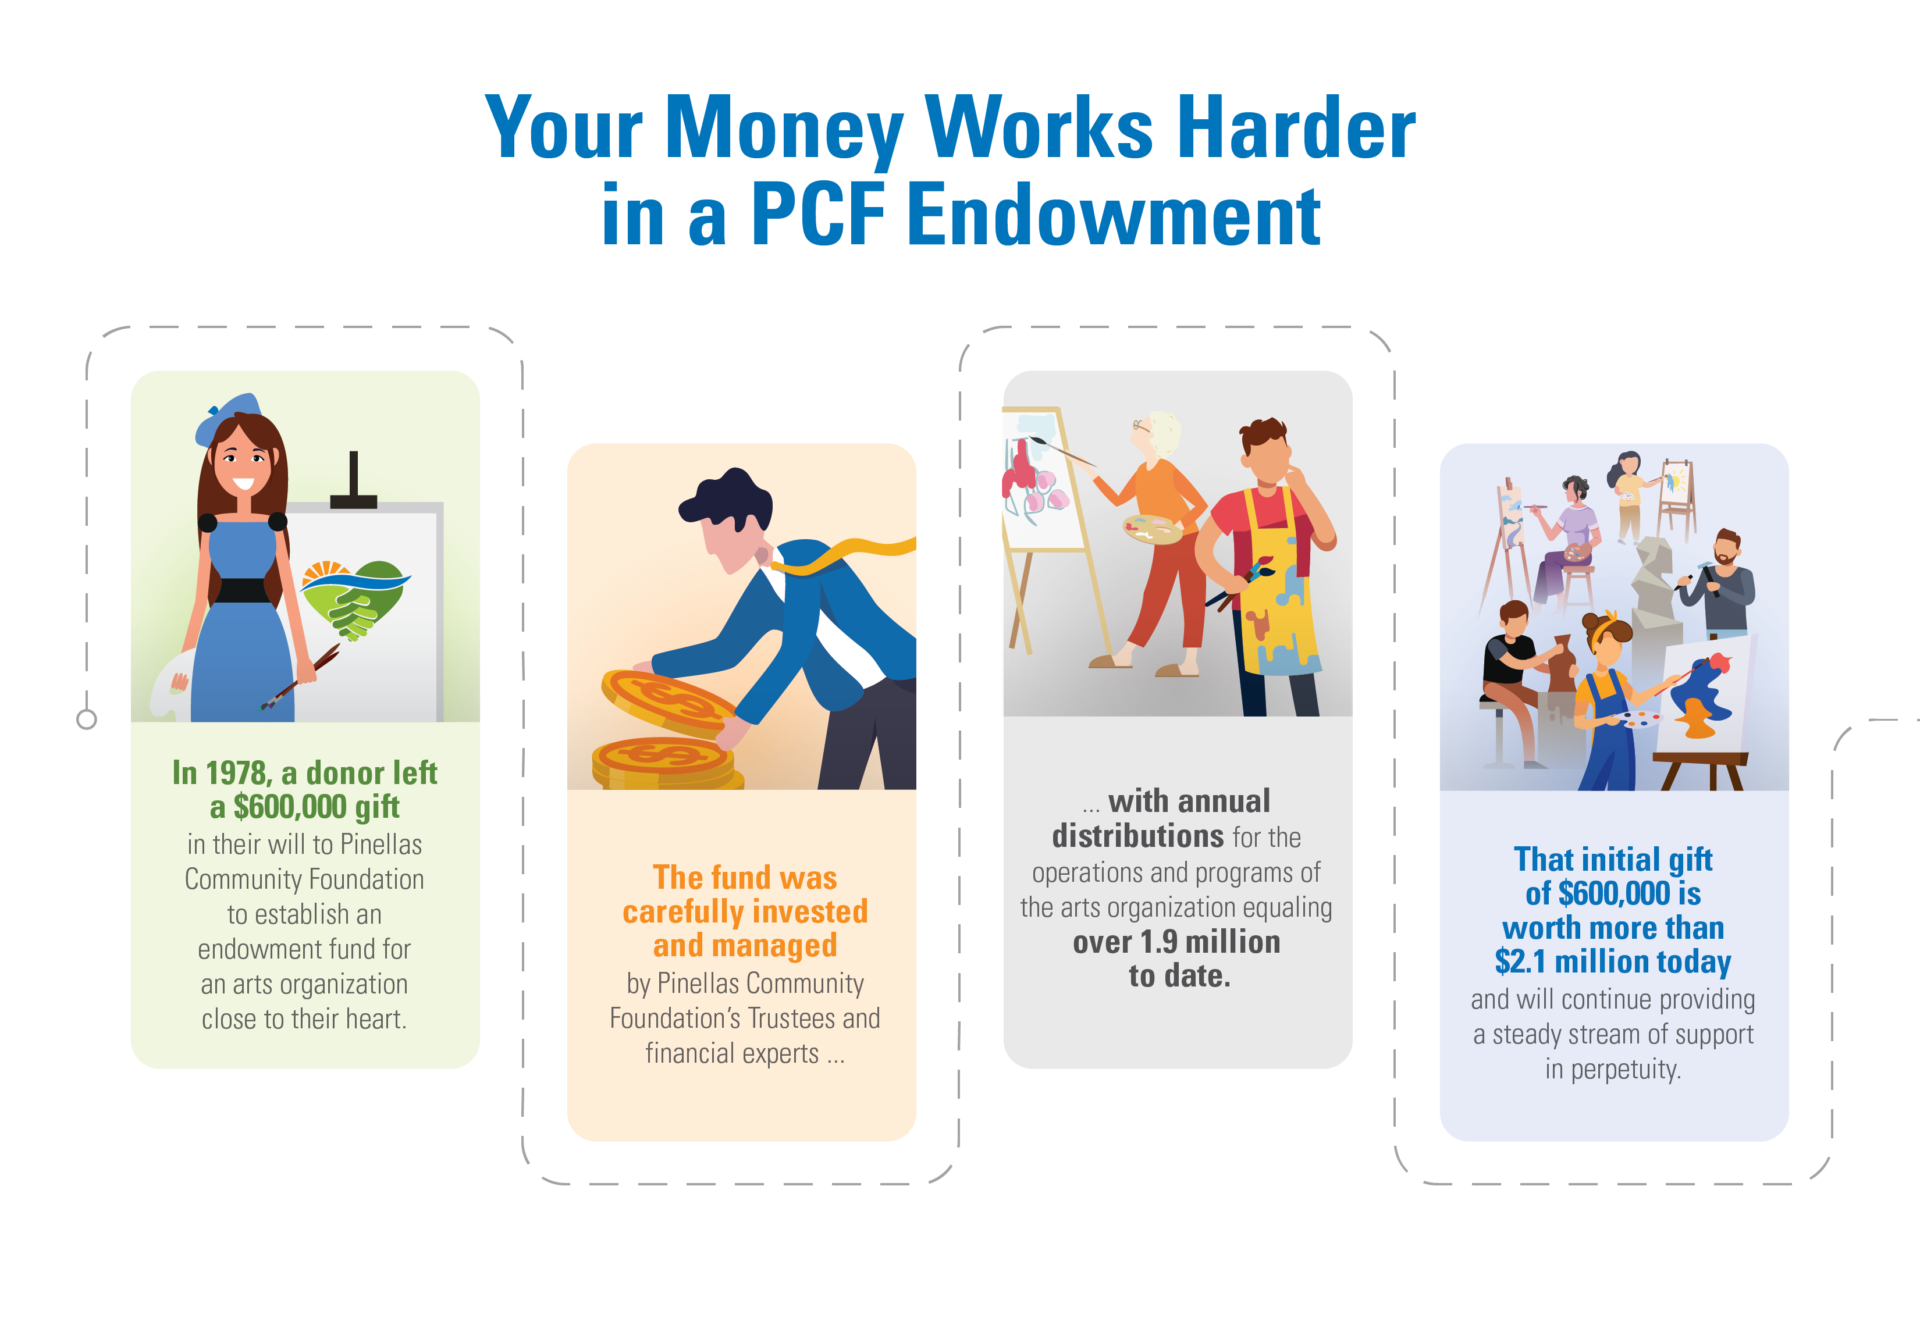 Your Money Works Harder in a PCF Endowment Fund, where an initial gift of $600,000 is worth more than $2.1 million 45 years later.